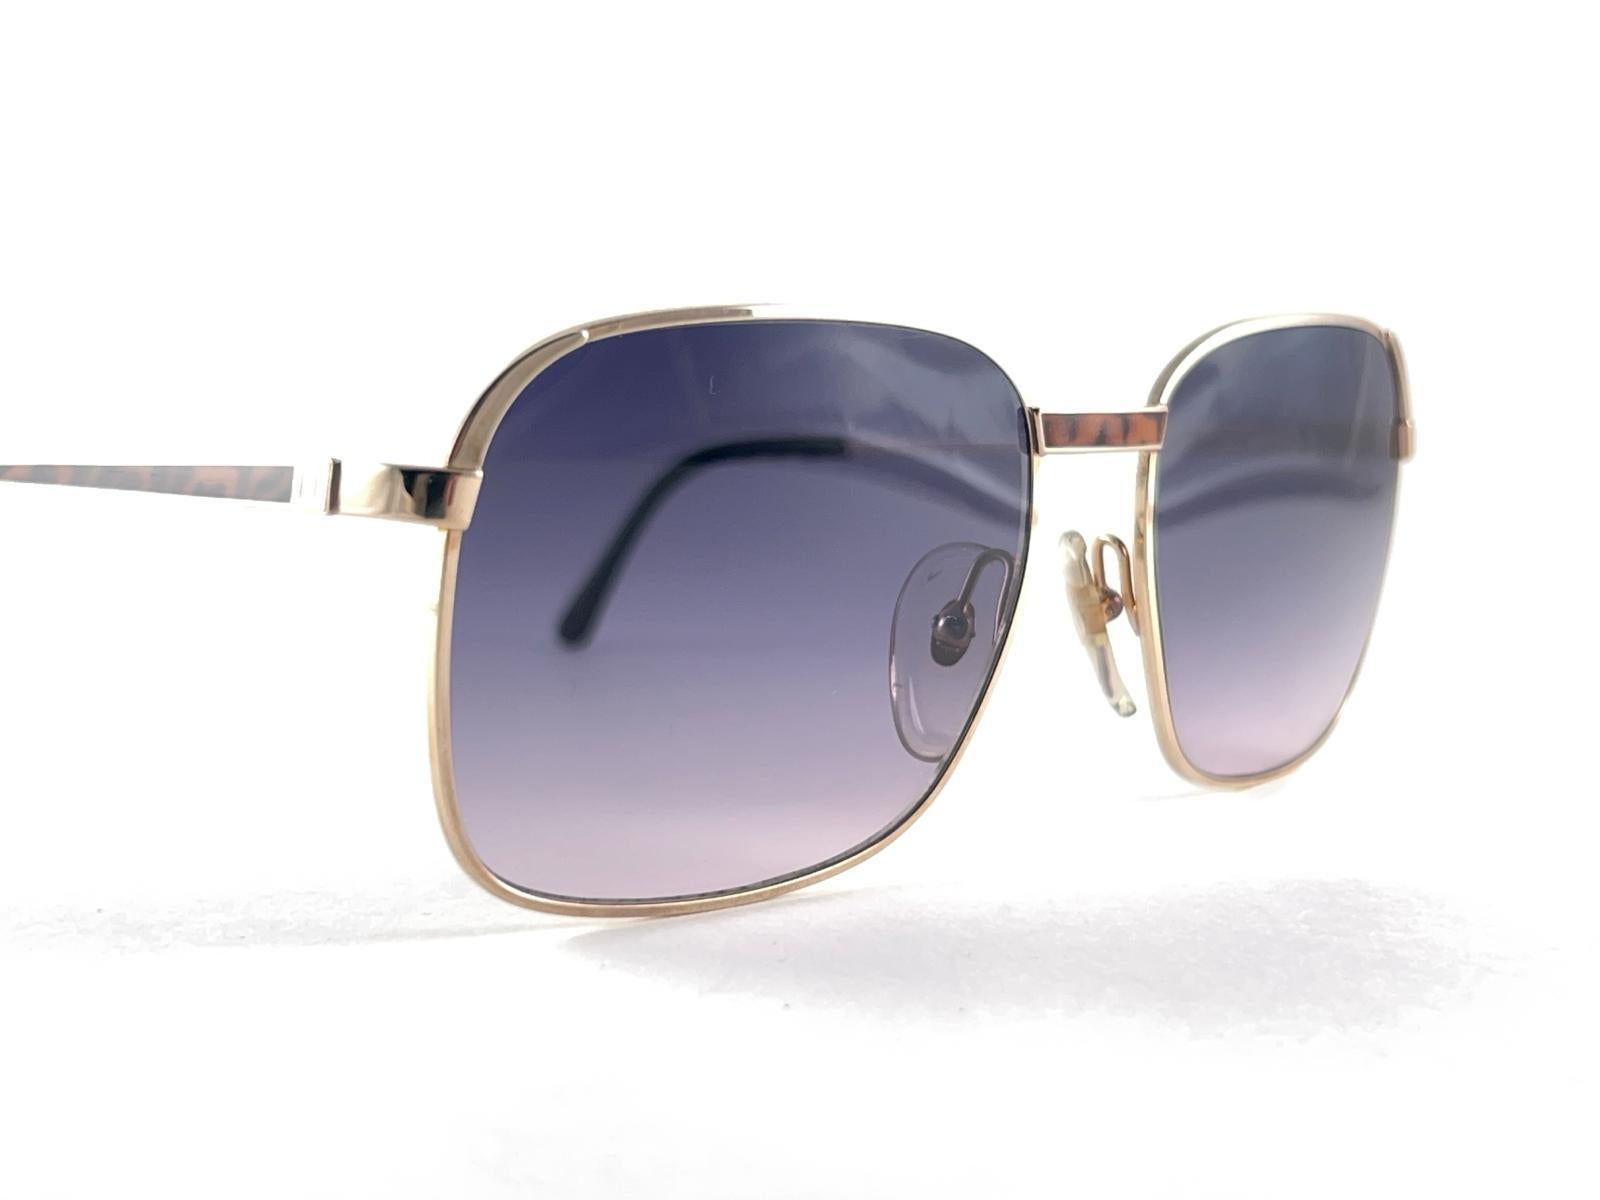 New Vintage Dunhill 6087 Real Horn Trims Details Frame Sunglasses 1980's Austria In Excellent Condition For Sale In Baleares, Baleares